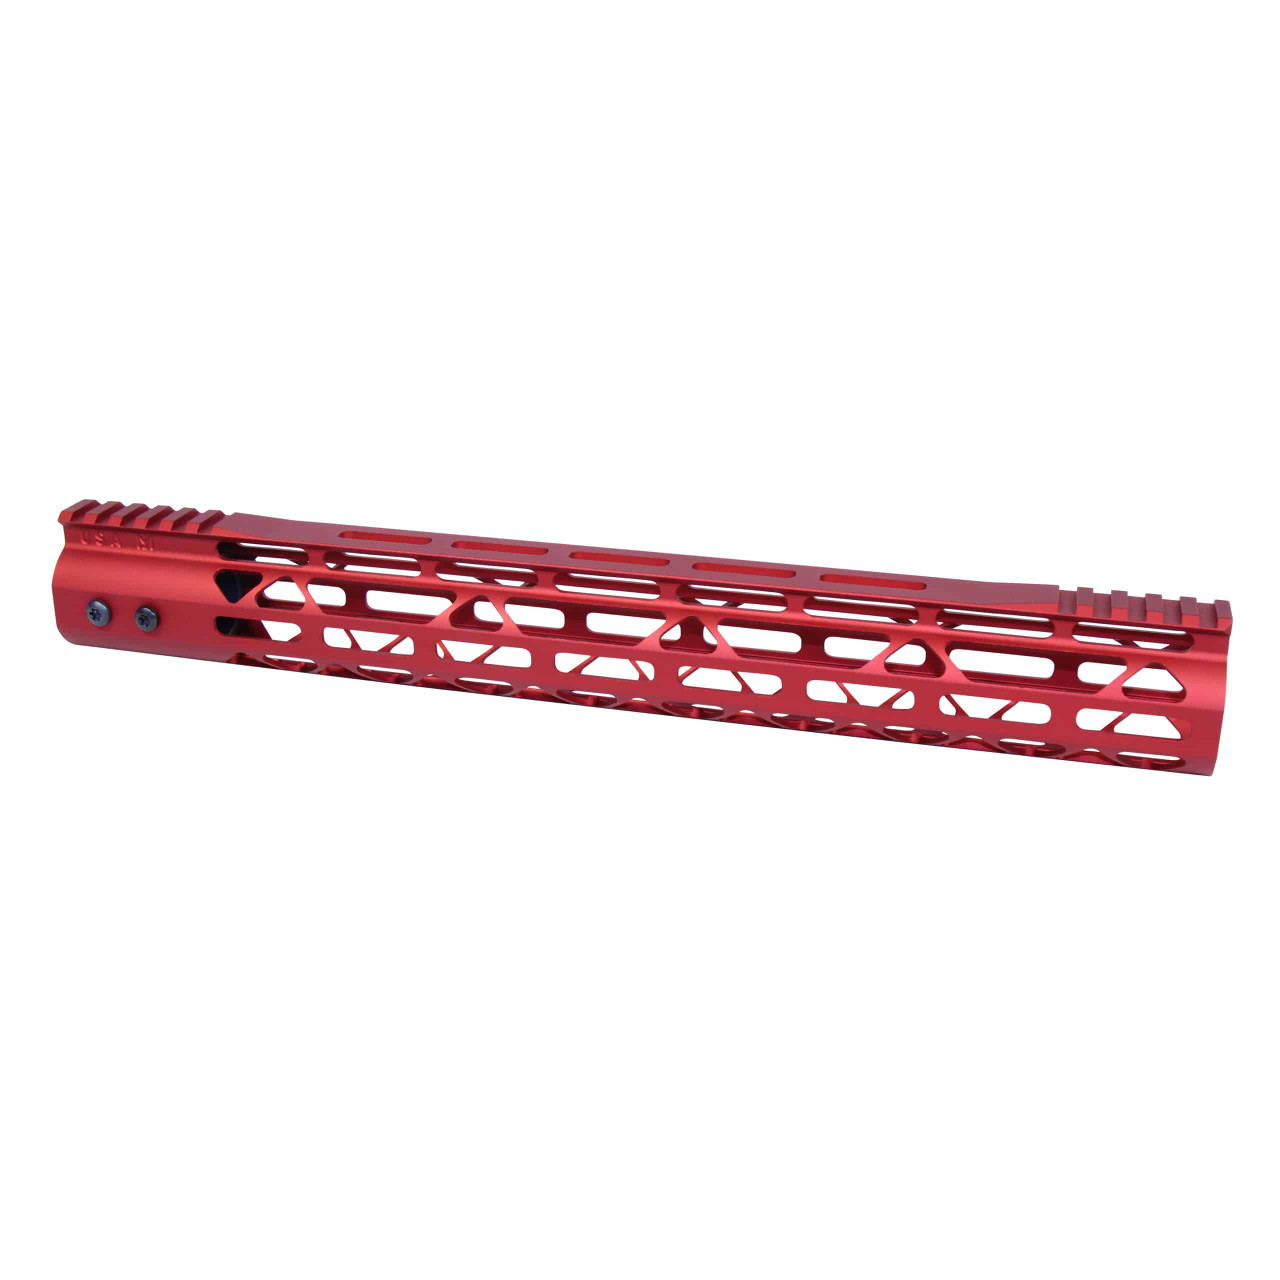 Guntec USA GT-15MDLTE-RED 15" MOD LITE Skeletonized  Series M-LOK Free Floating Handguard With Monolithic Top Rail (Anodized Red)